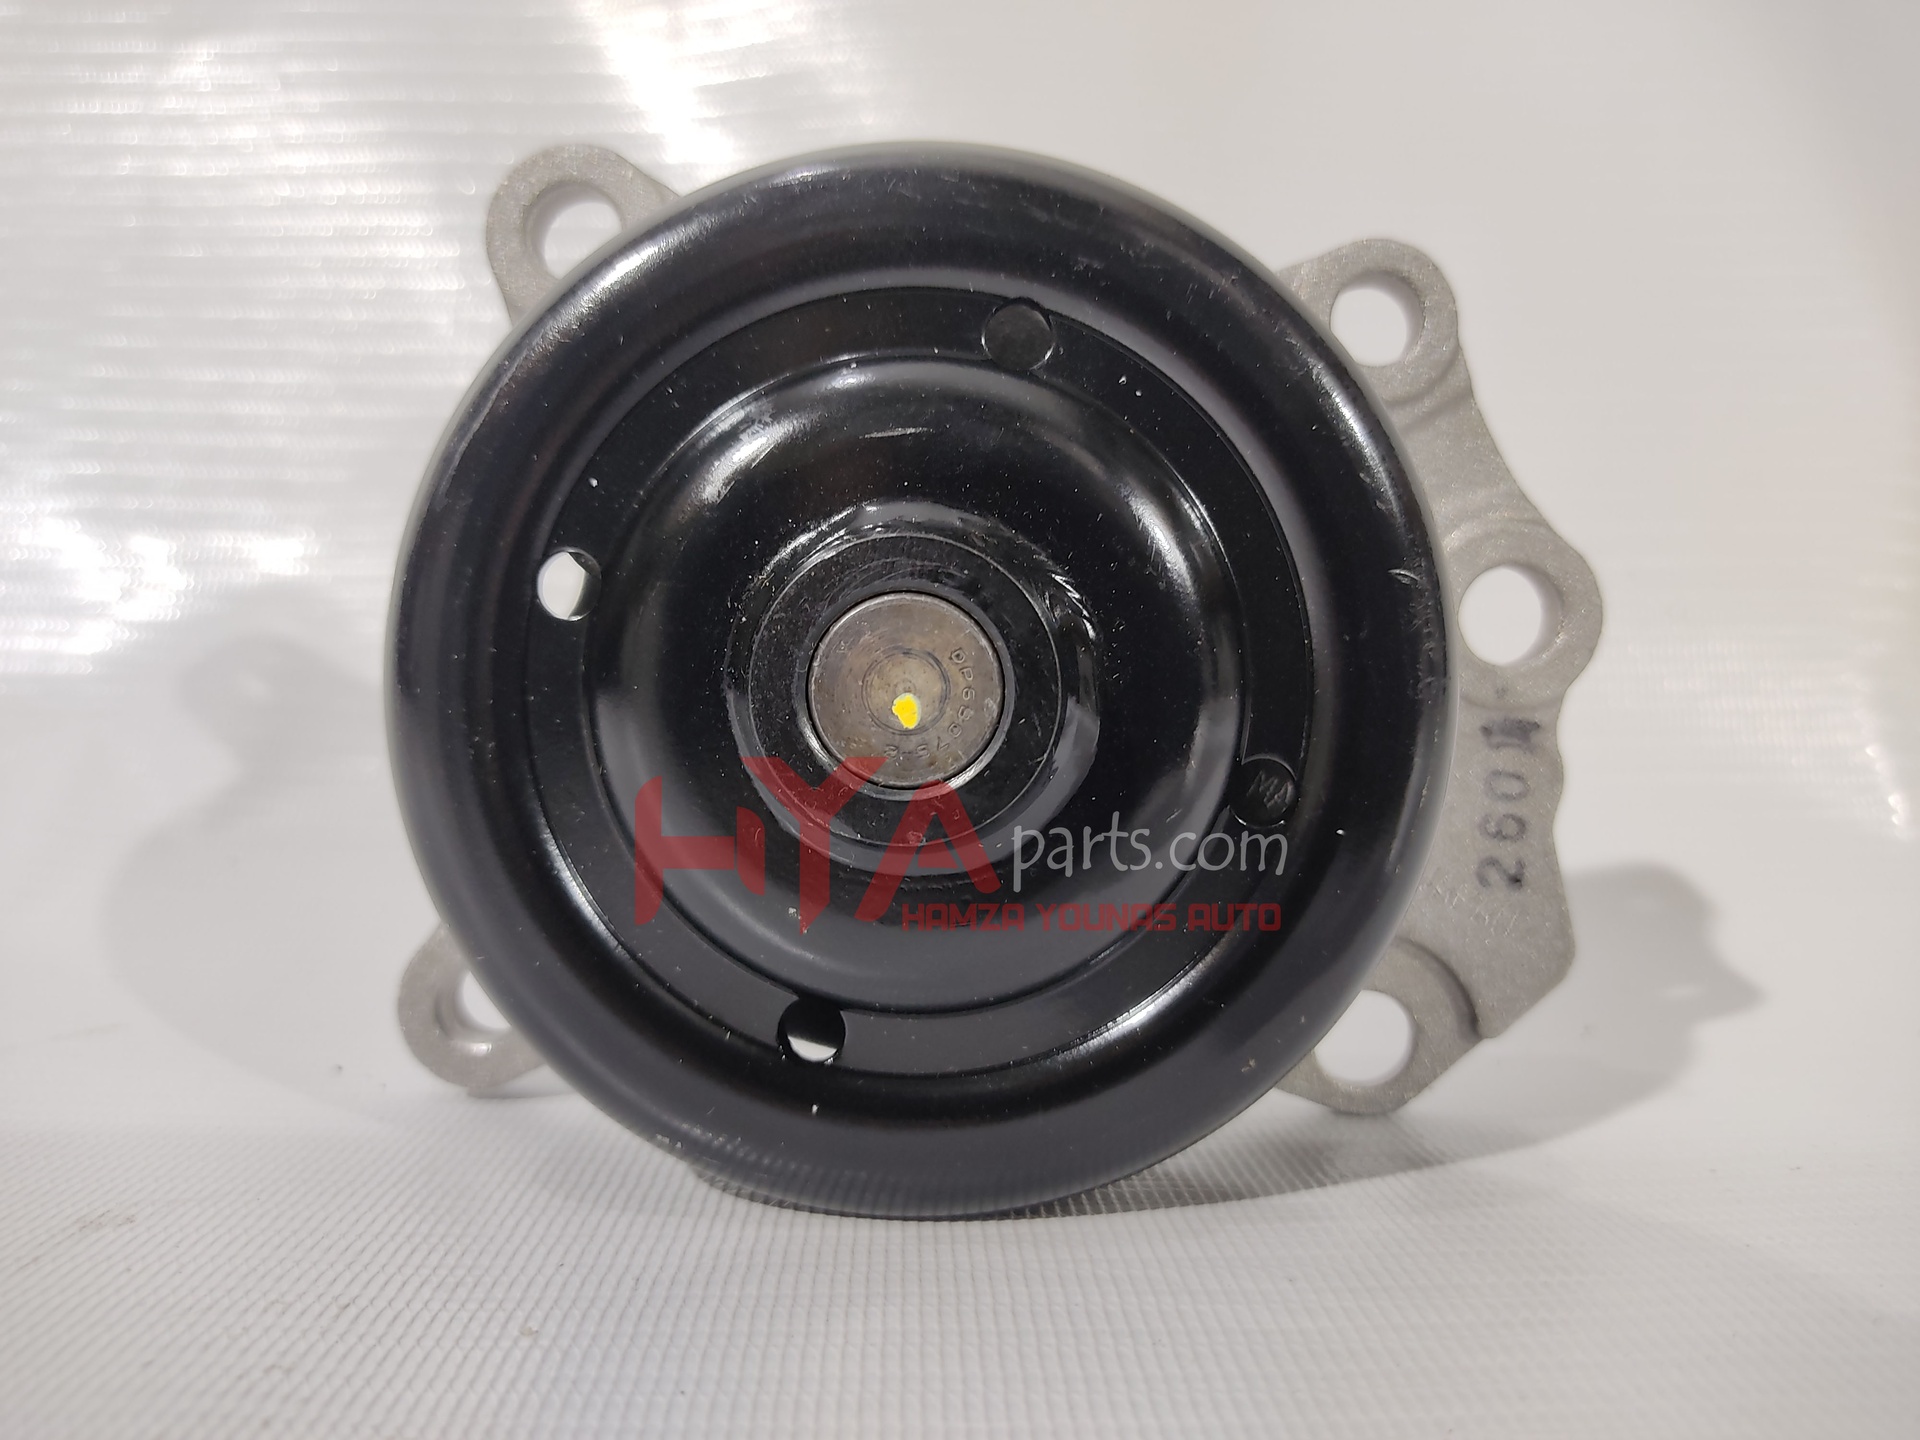 [NPW T-176] PUMP ASSY, ENGINE WATER (WATER BODY)